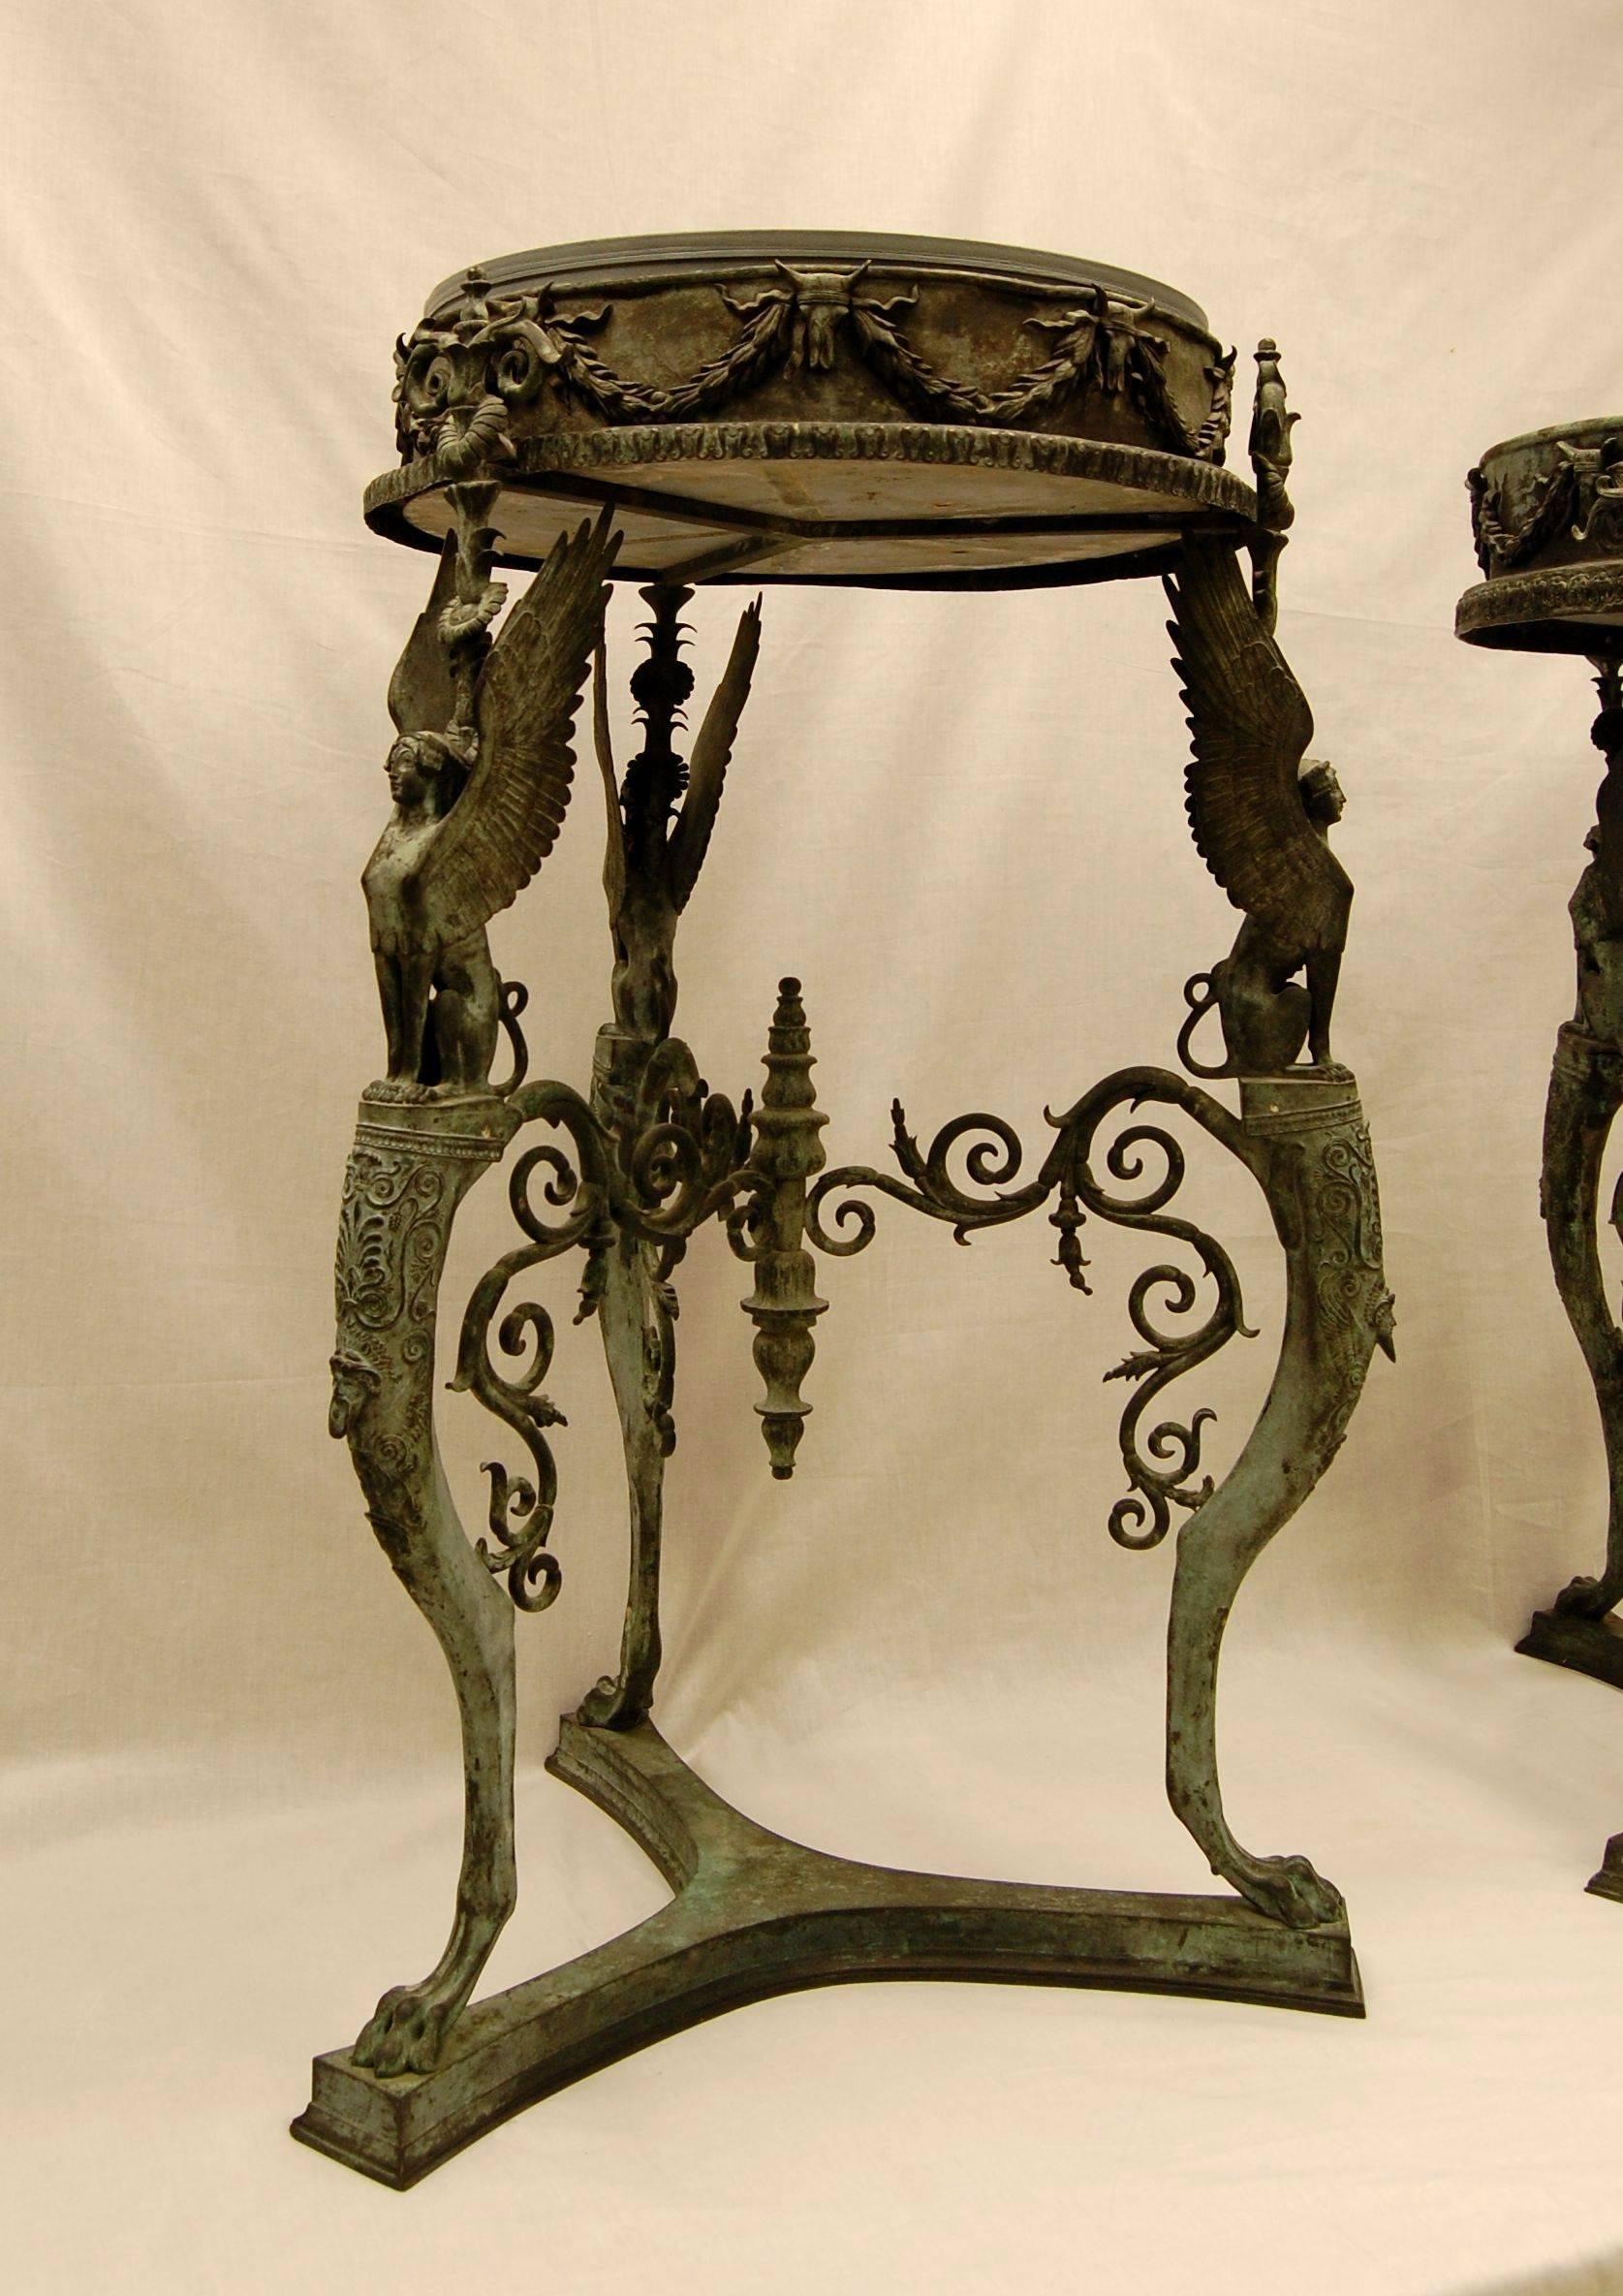 The left brazier was cast by Sabatino De Angelis and Son, from an original item in the National Museum of Naples and is labelled as shown. Listed among many bronze artifacts from Campanian cities buried by Vesuvius in The Field Museum of Natural